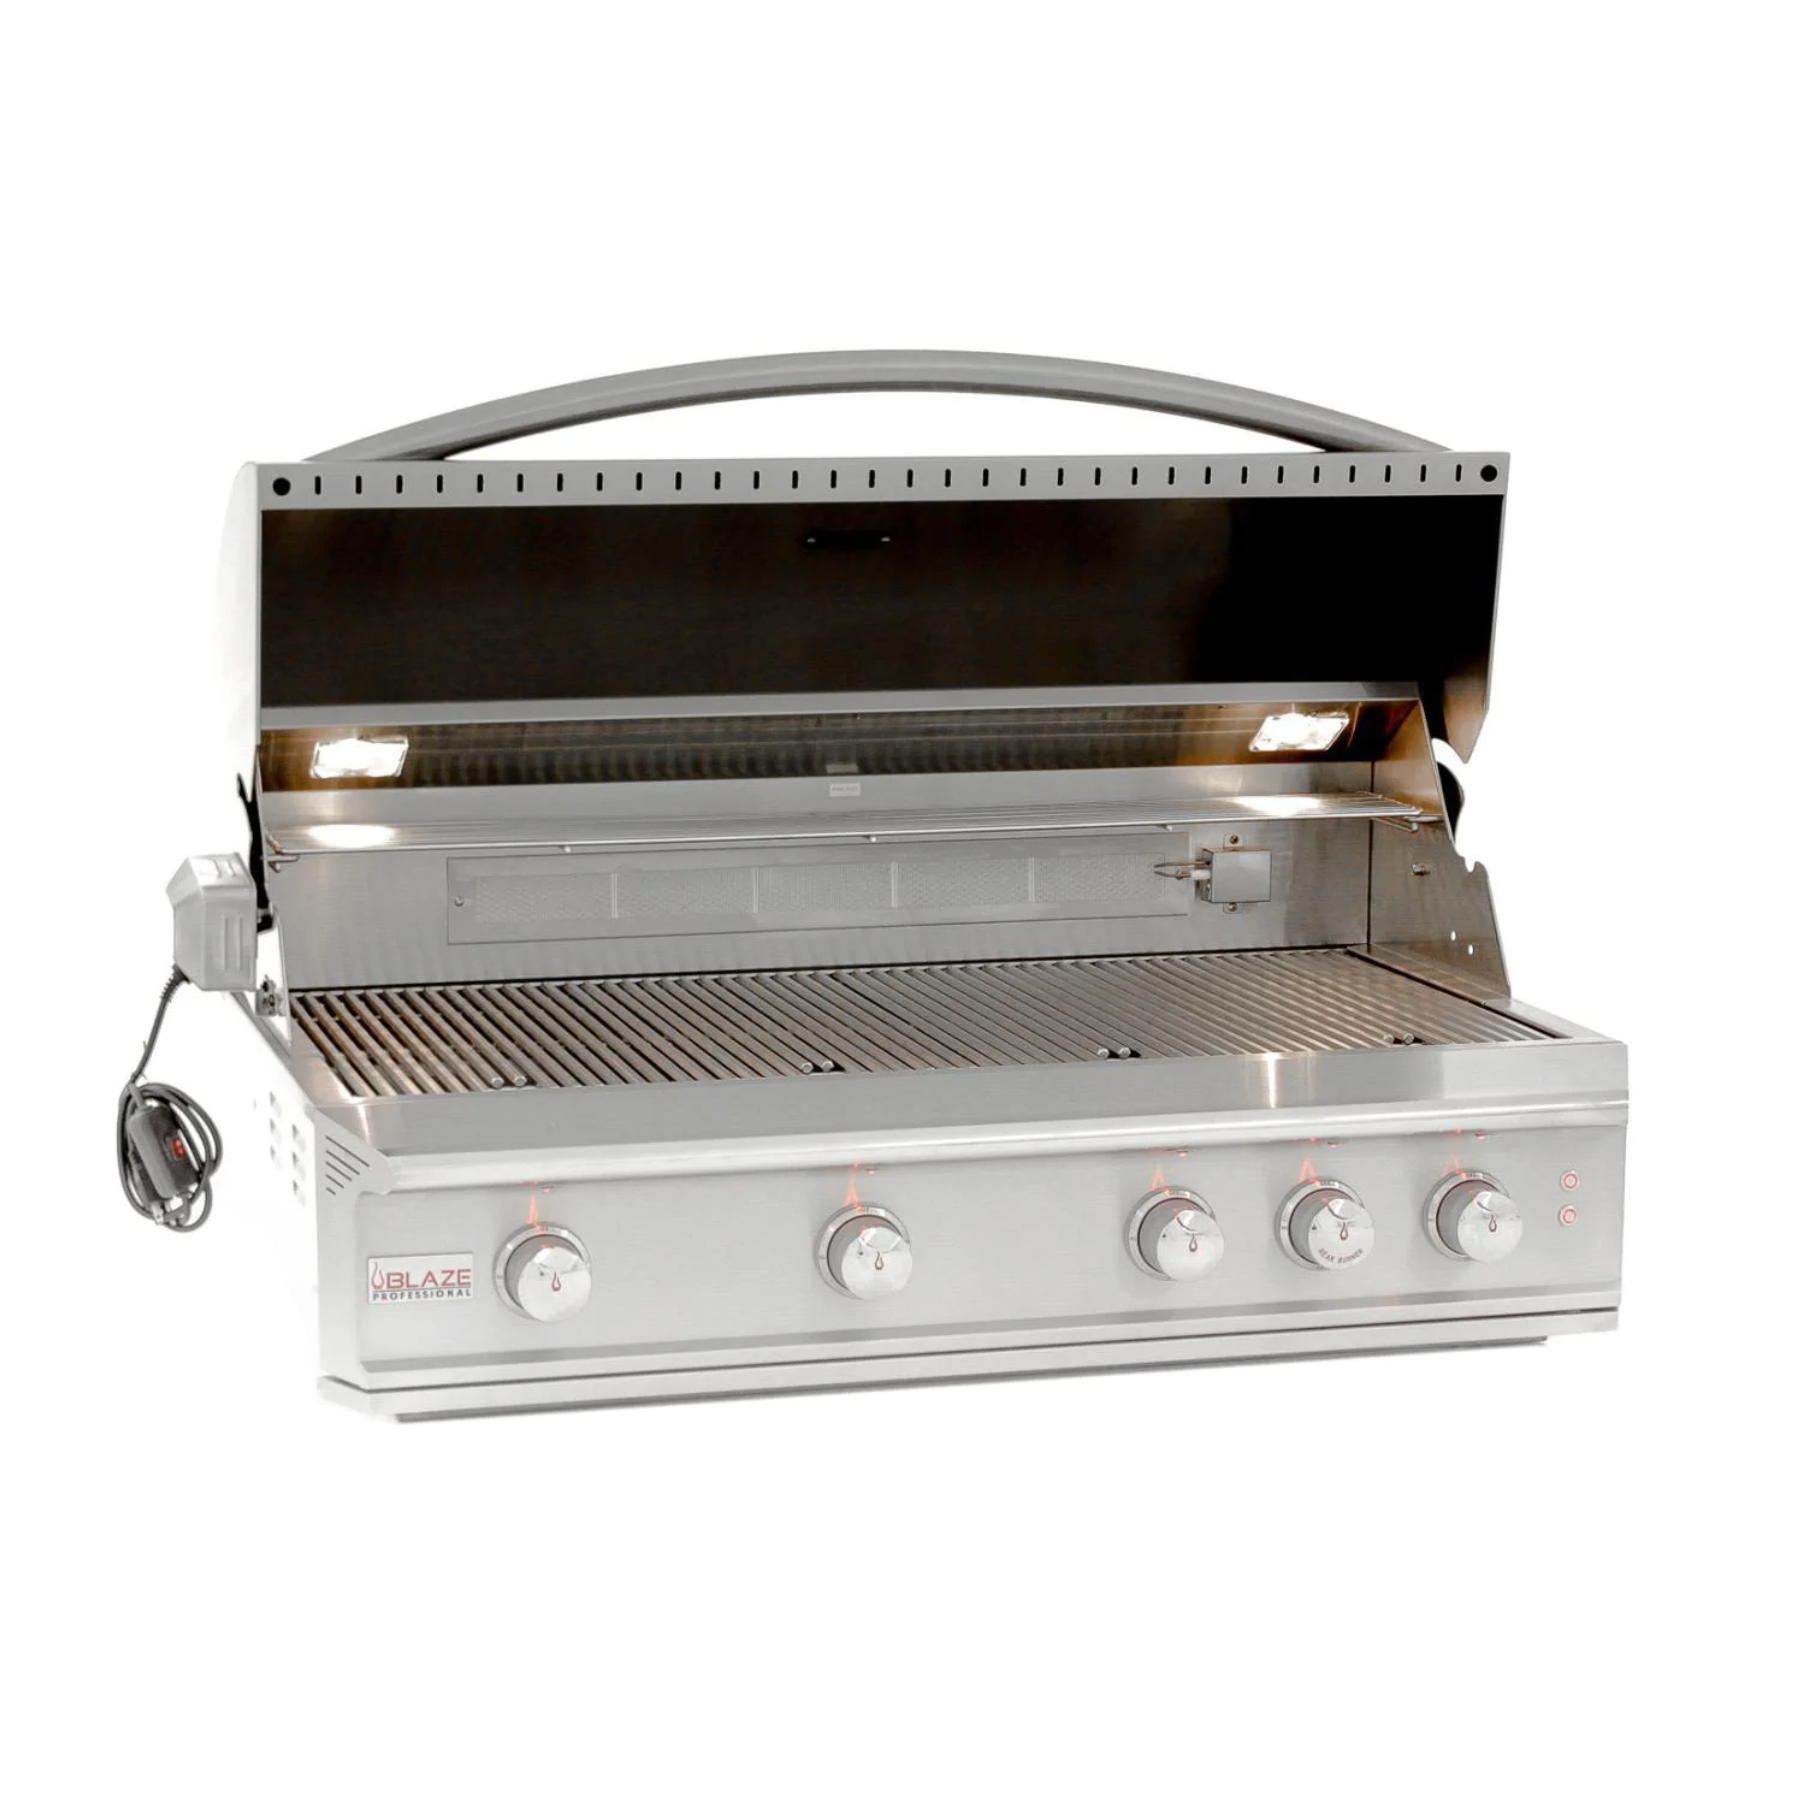 Blaze Professional LUX 44" 4-Burner Built-In Natural Gas Grill With Rear Infrared Burner I The BBQHQ